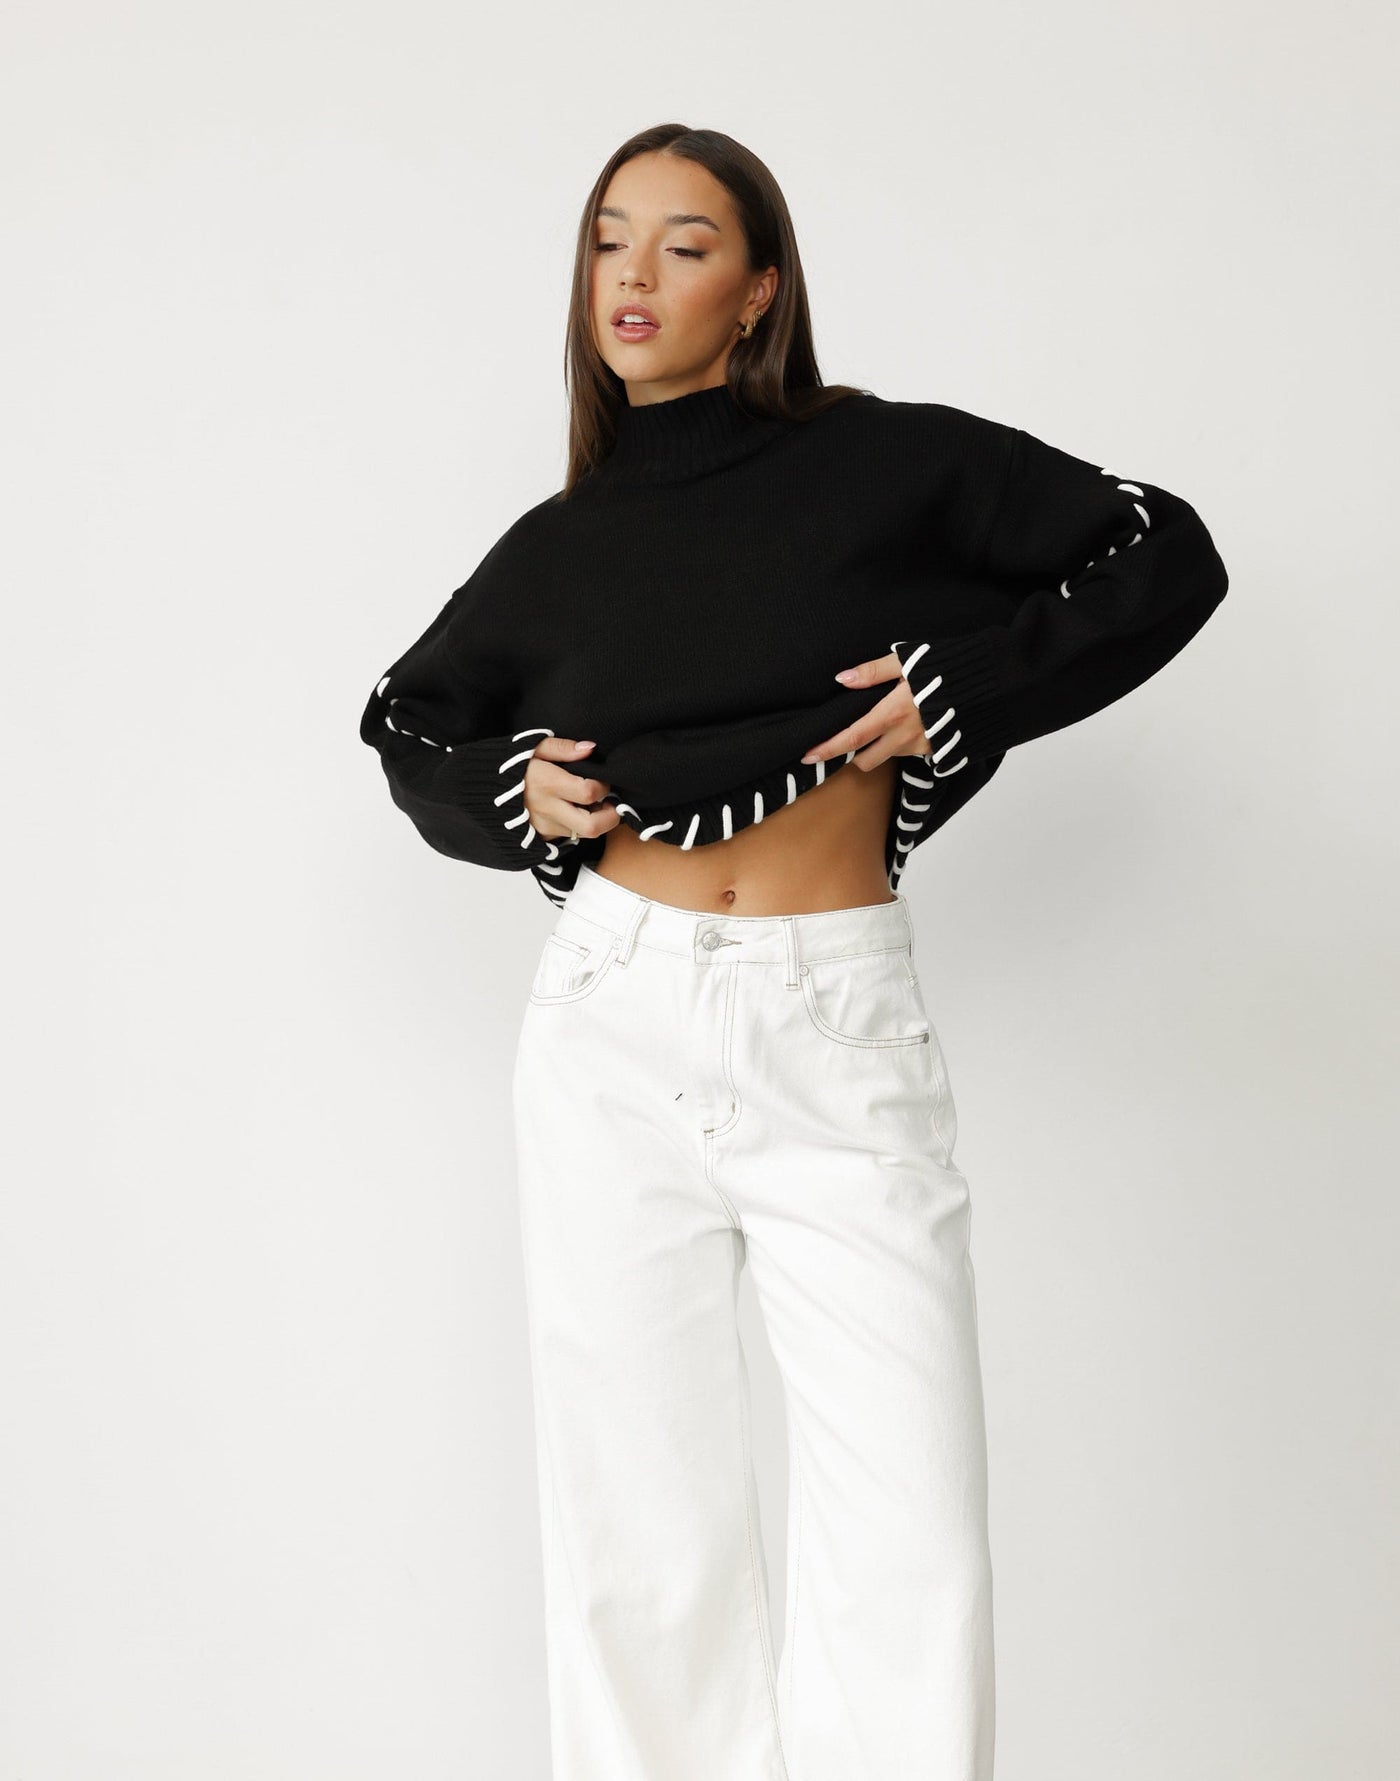 Tifanni Jumper (Black) - Turtleneck Relaxed Fit Whip Stitch Detail Jumper - Women's Top - Charcoal Clothing